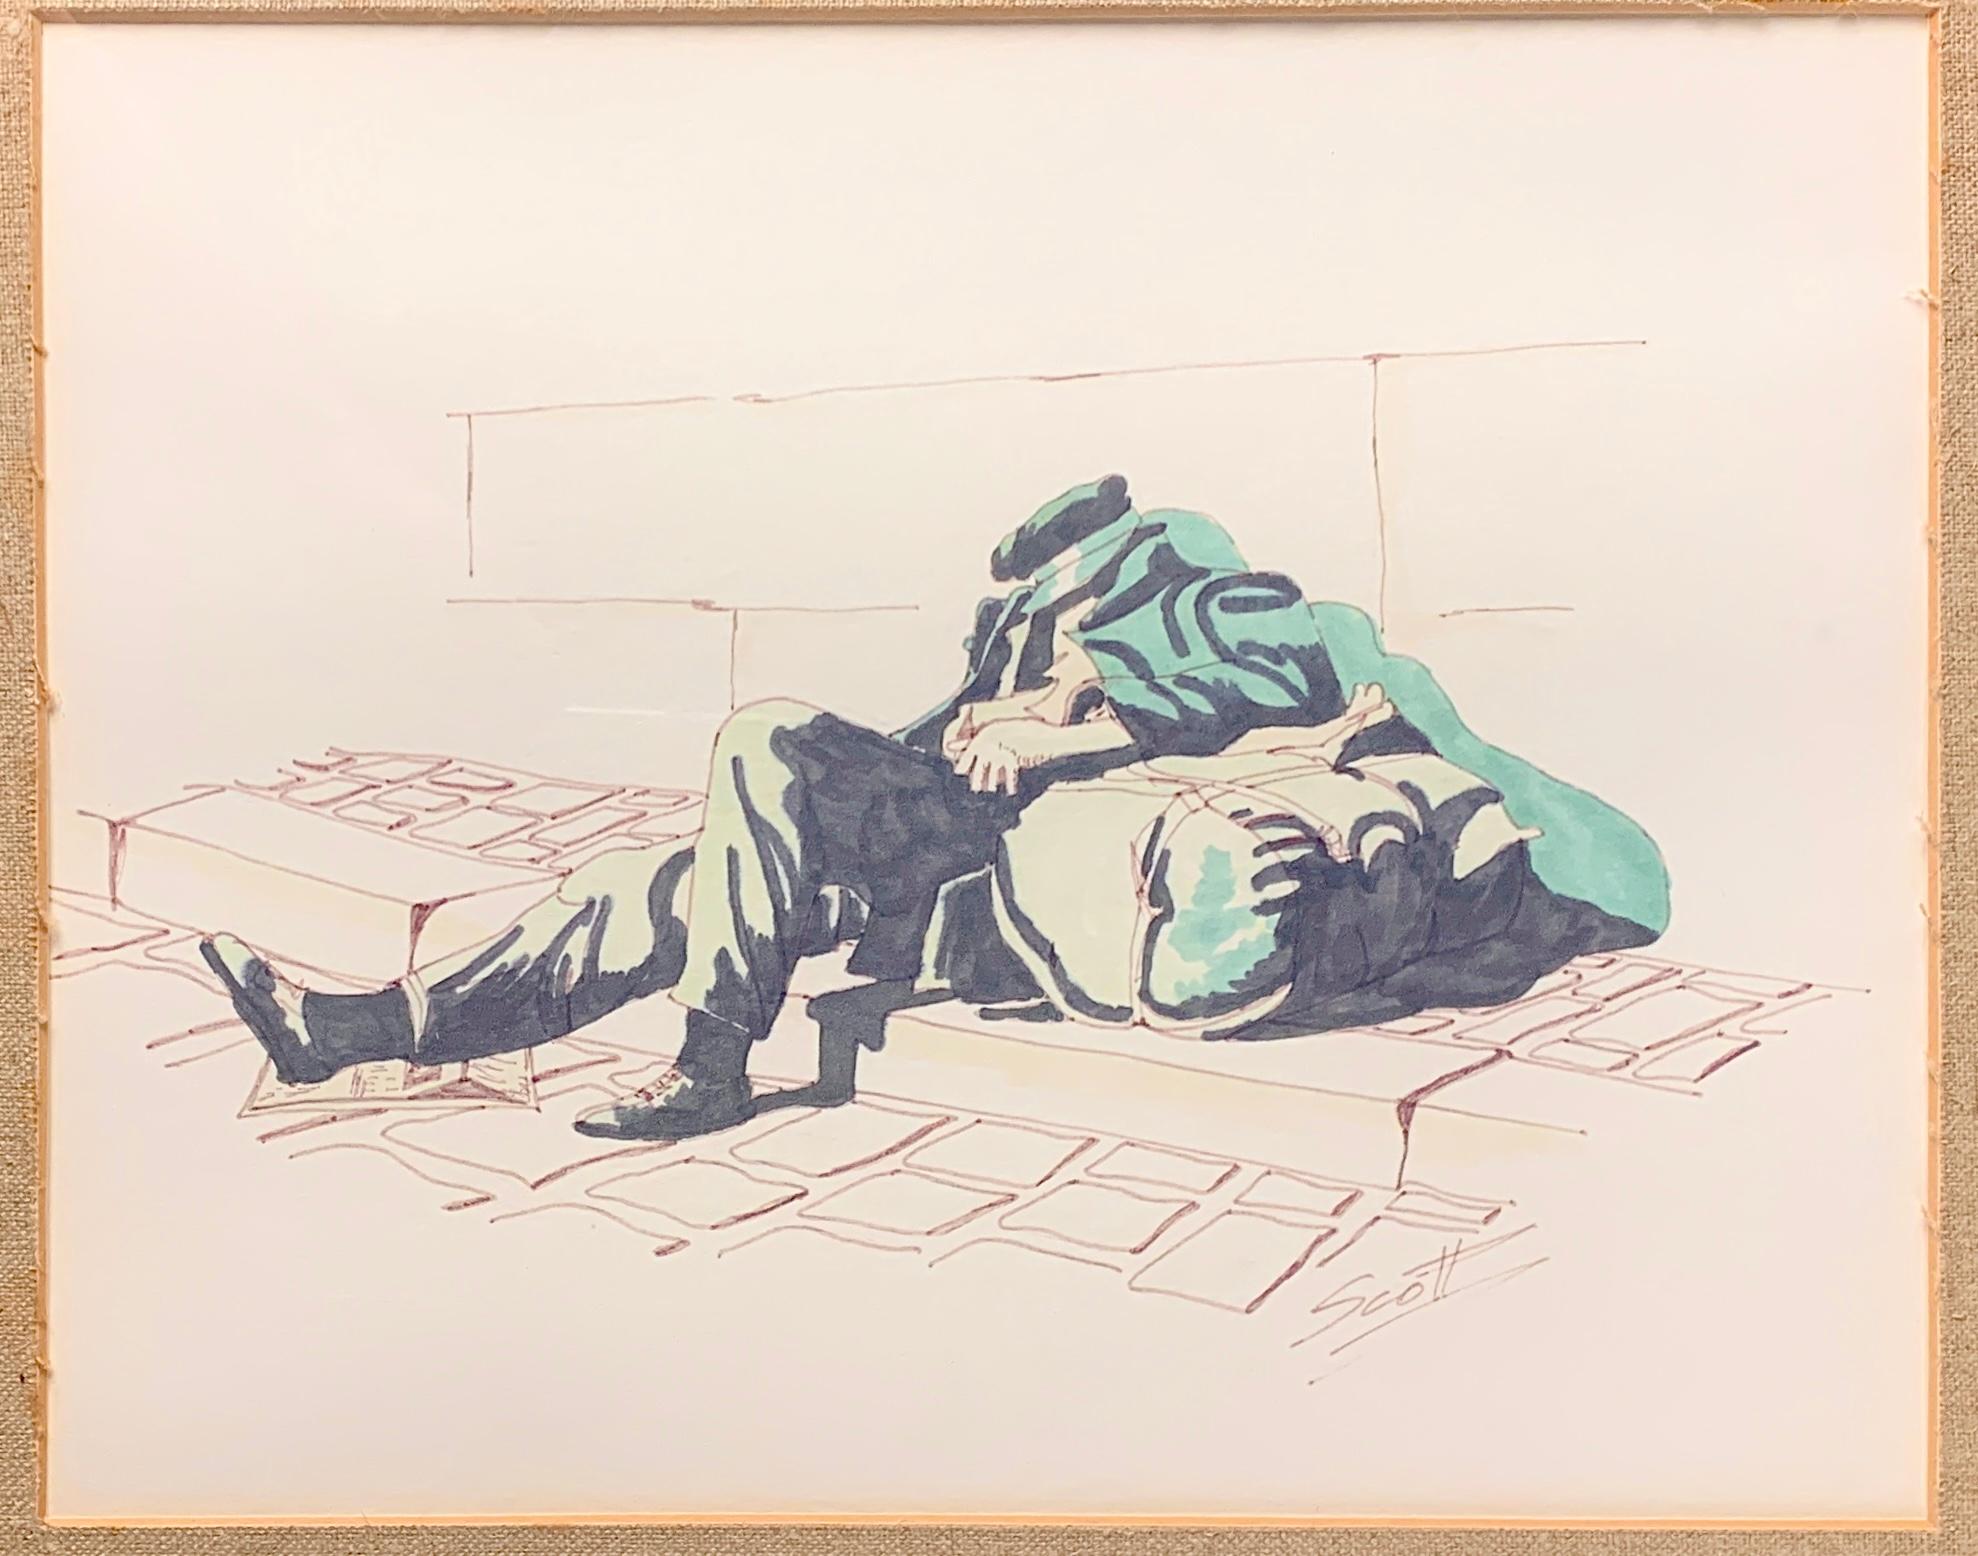 Watercolor and Pencil by Scott of Homeless - Painting by Unknown